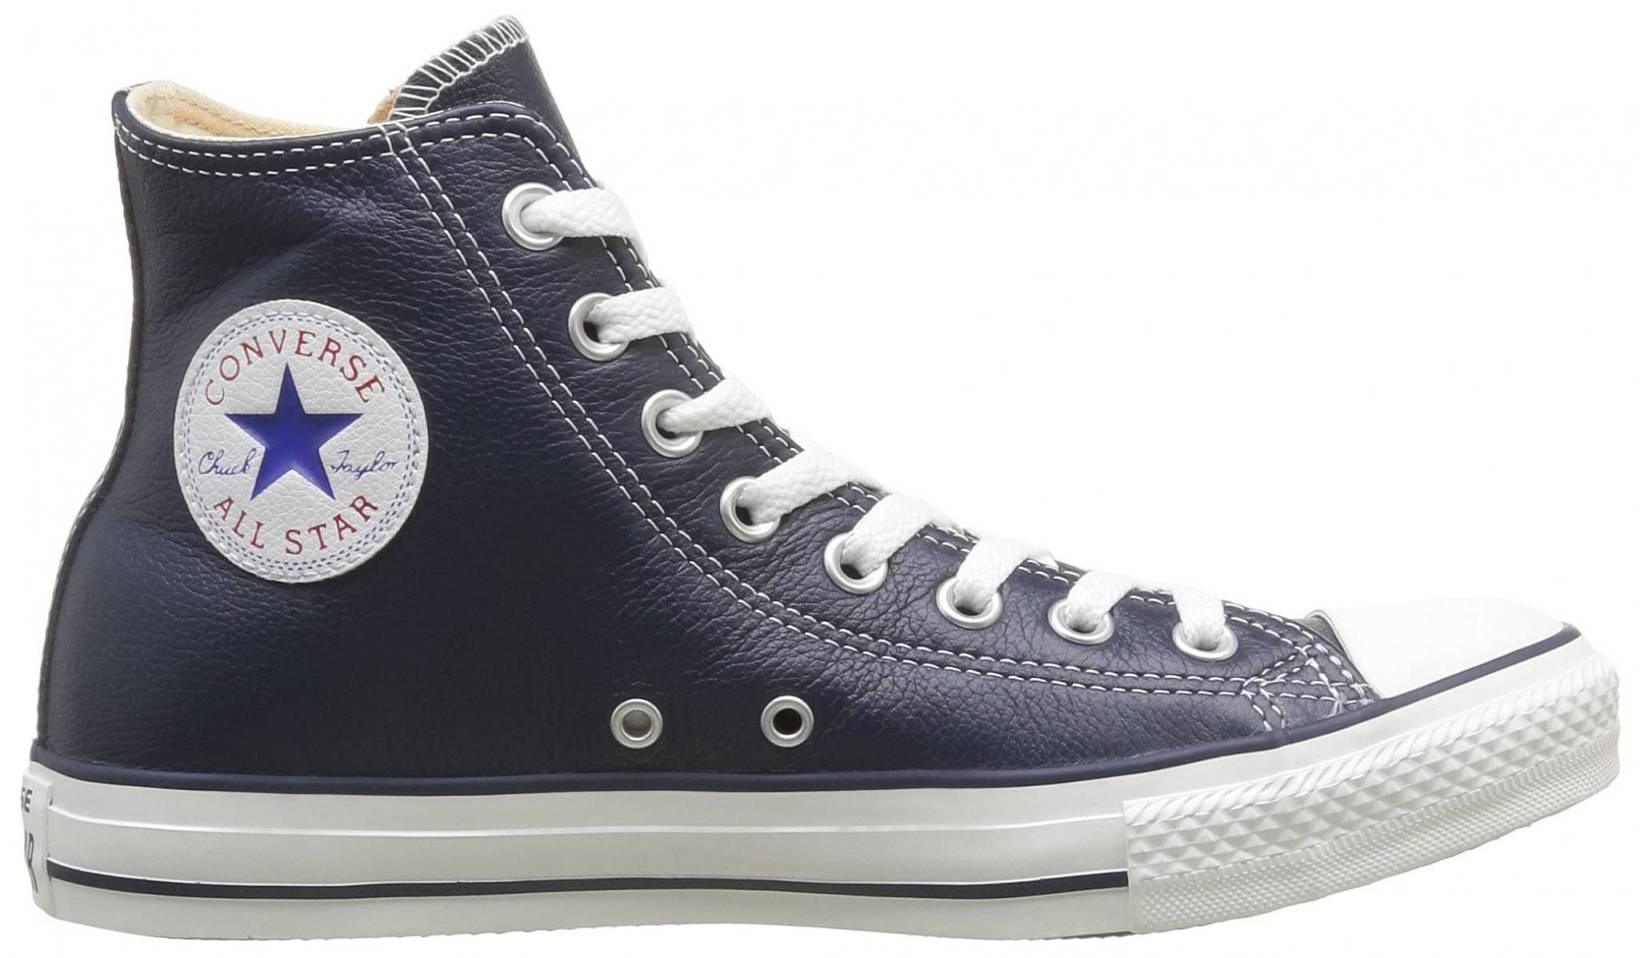 Converse Chuck Taylor All Star Leather High Top â Shoes Reviews & Reasons To Buy